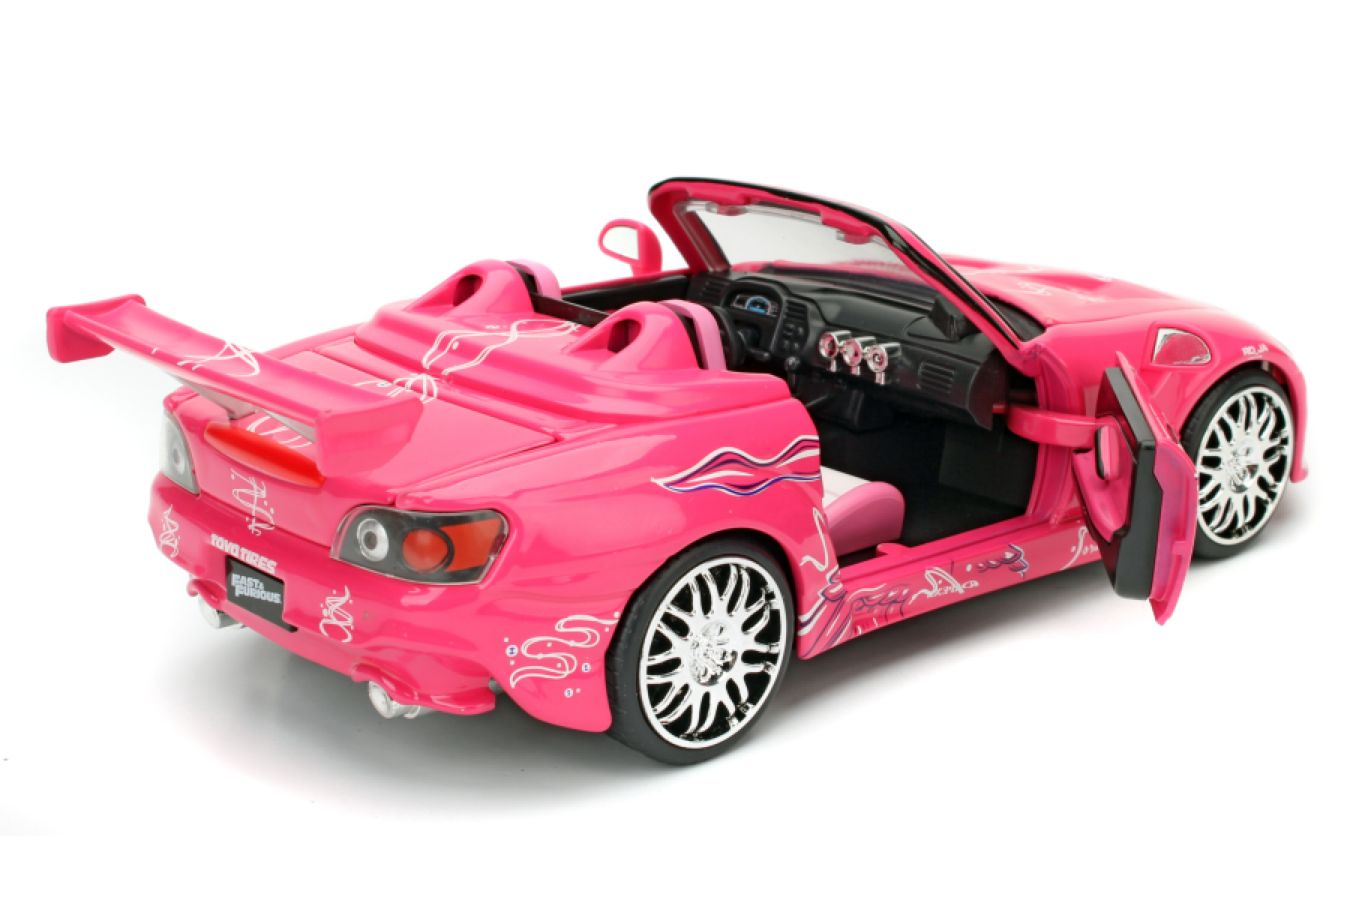 Fast and Furious - Suki's 2001 Honda S2000 1:24 Scale Hollywood Ride